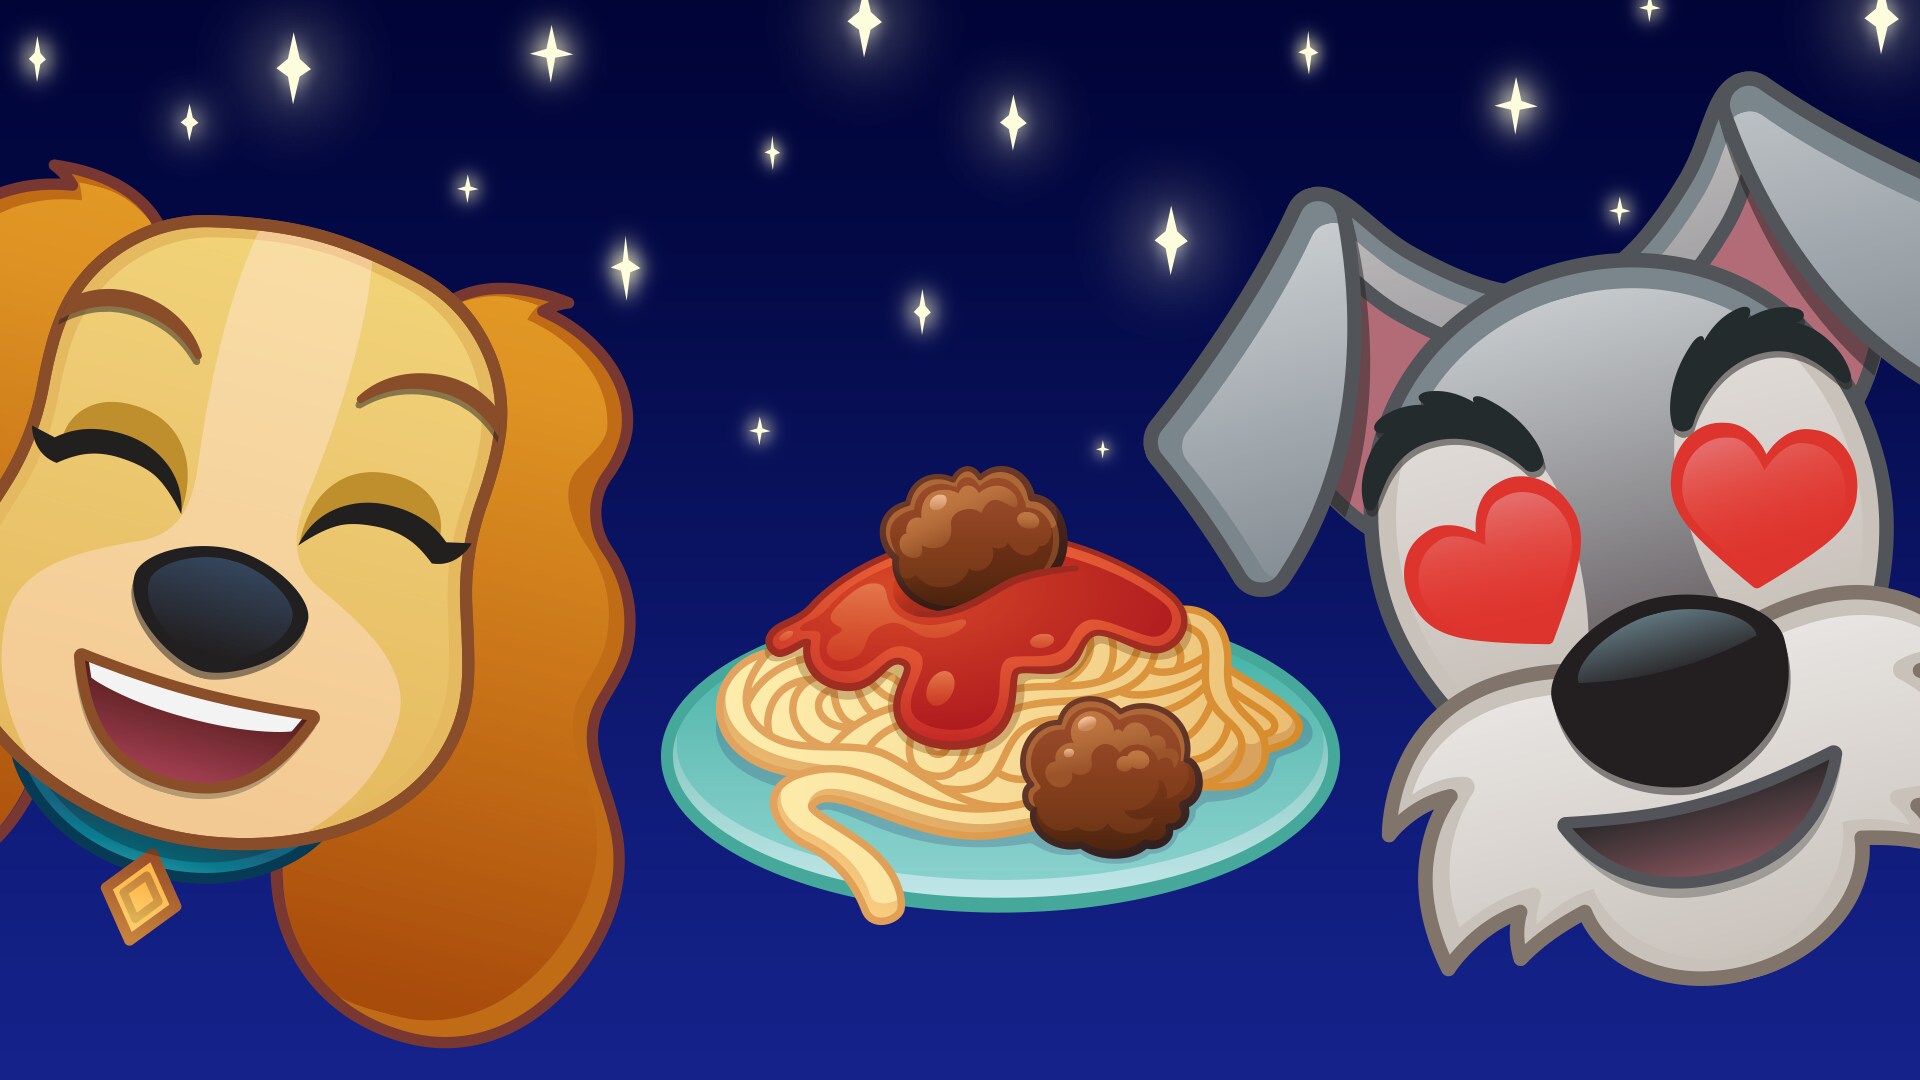 Lady and the Tramp | As Told by Emoji by Disney